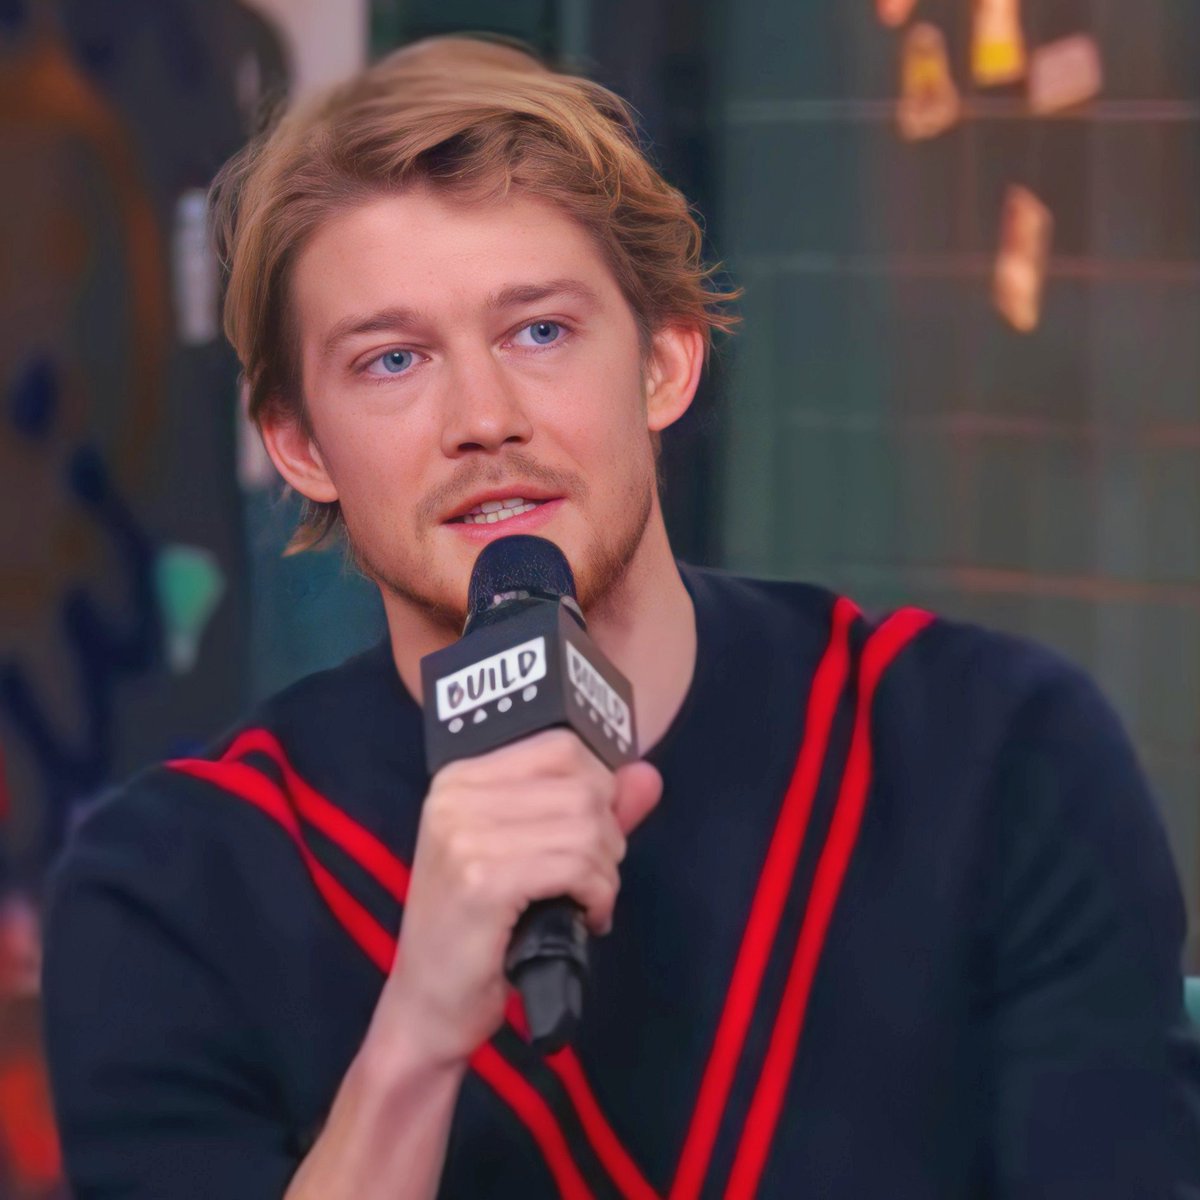 Just wanted to add that Joe has such a good American accent that his co-star in Billy Lynn's Long Halftime Walk didn't know that he was British until 2/3 weeks of shooting!